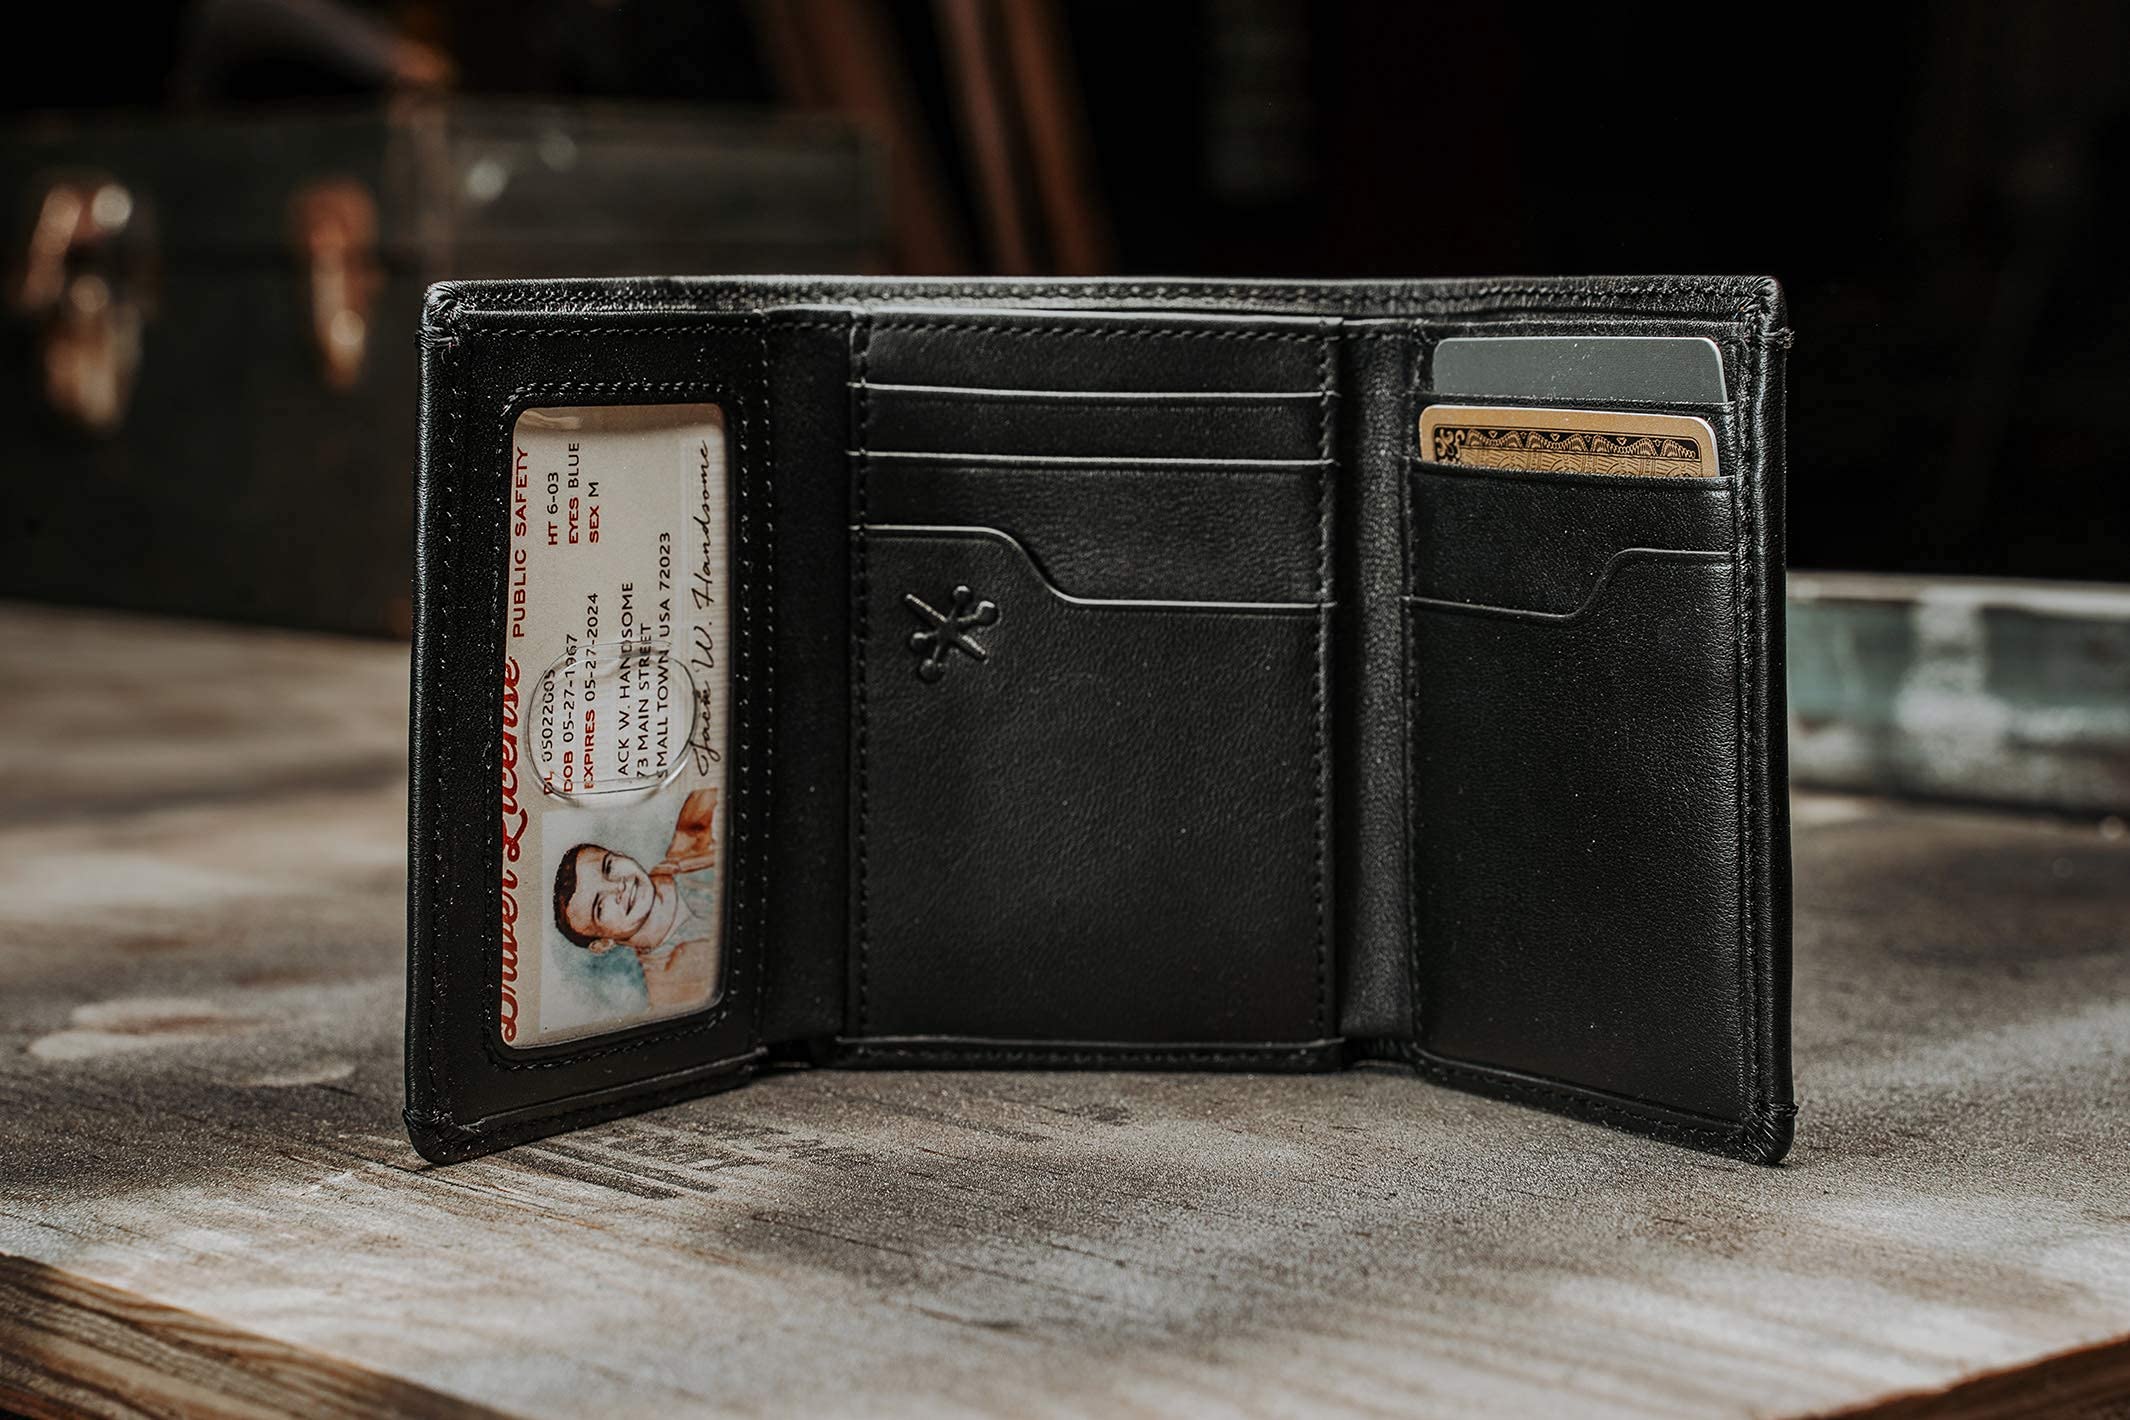 HoJ Co. Eastwood TRIFOLD Wallet | Double Bill Compartment | Extra Capacity Men's Tri fold Wallet | Nappa Full Grain Leather